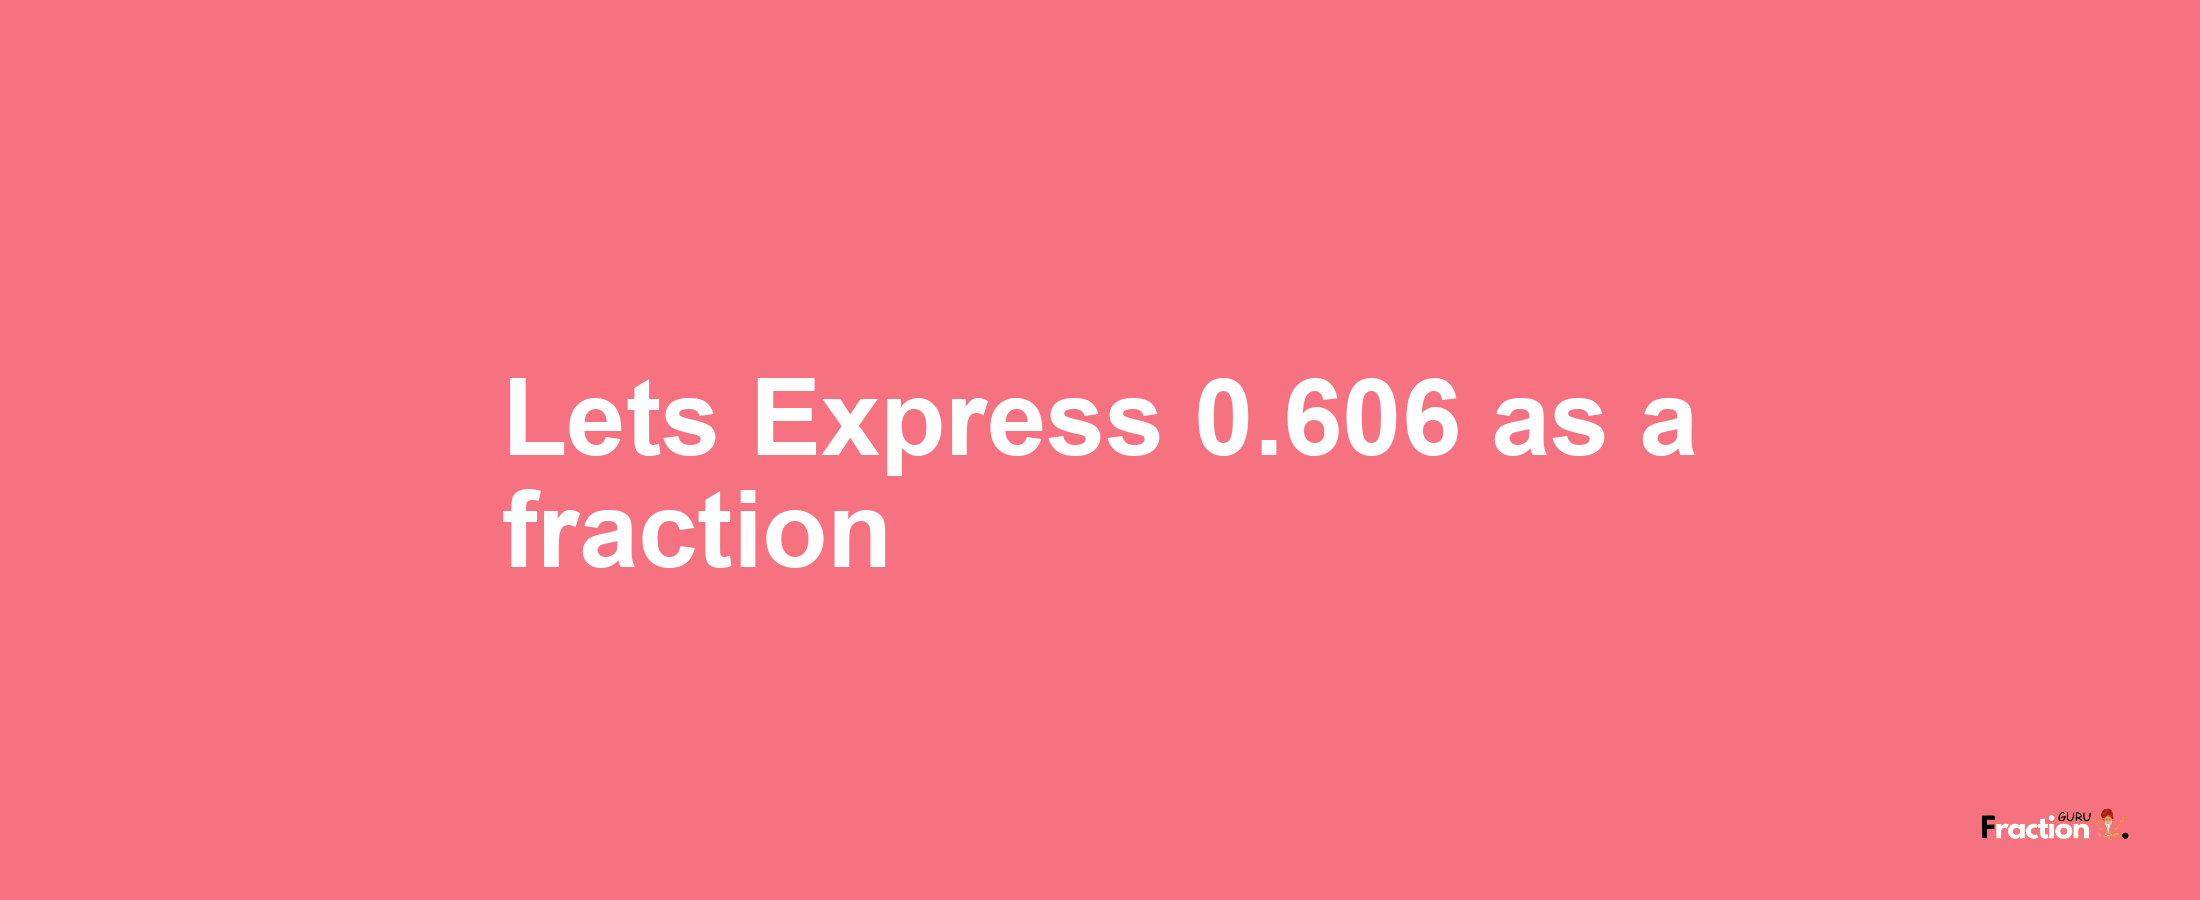 Lets Express 0.606 as afraction